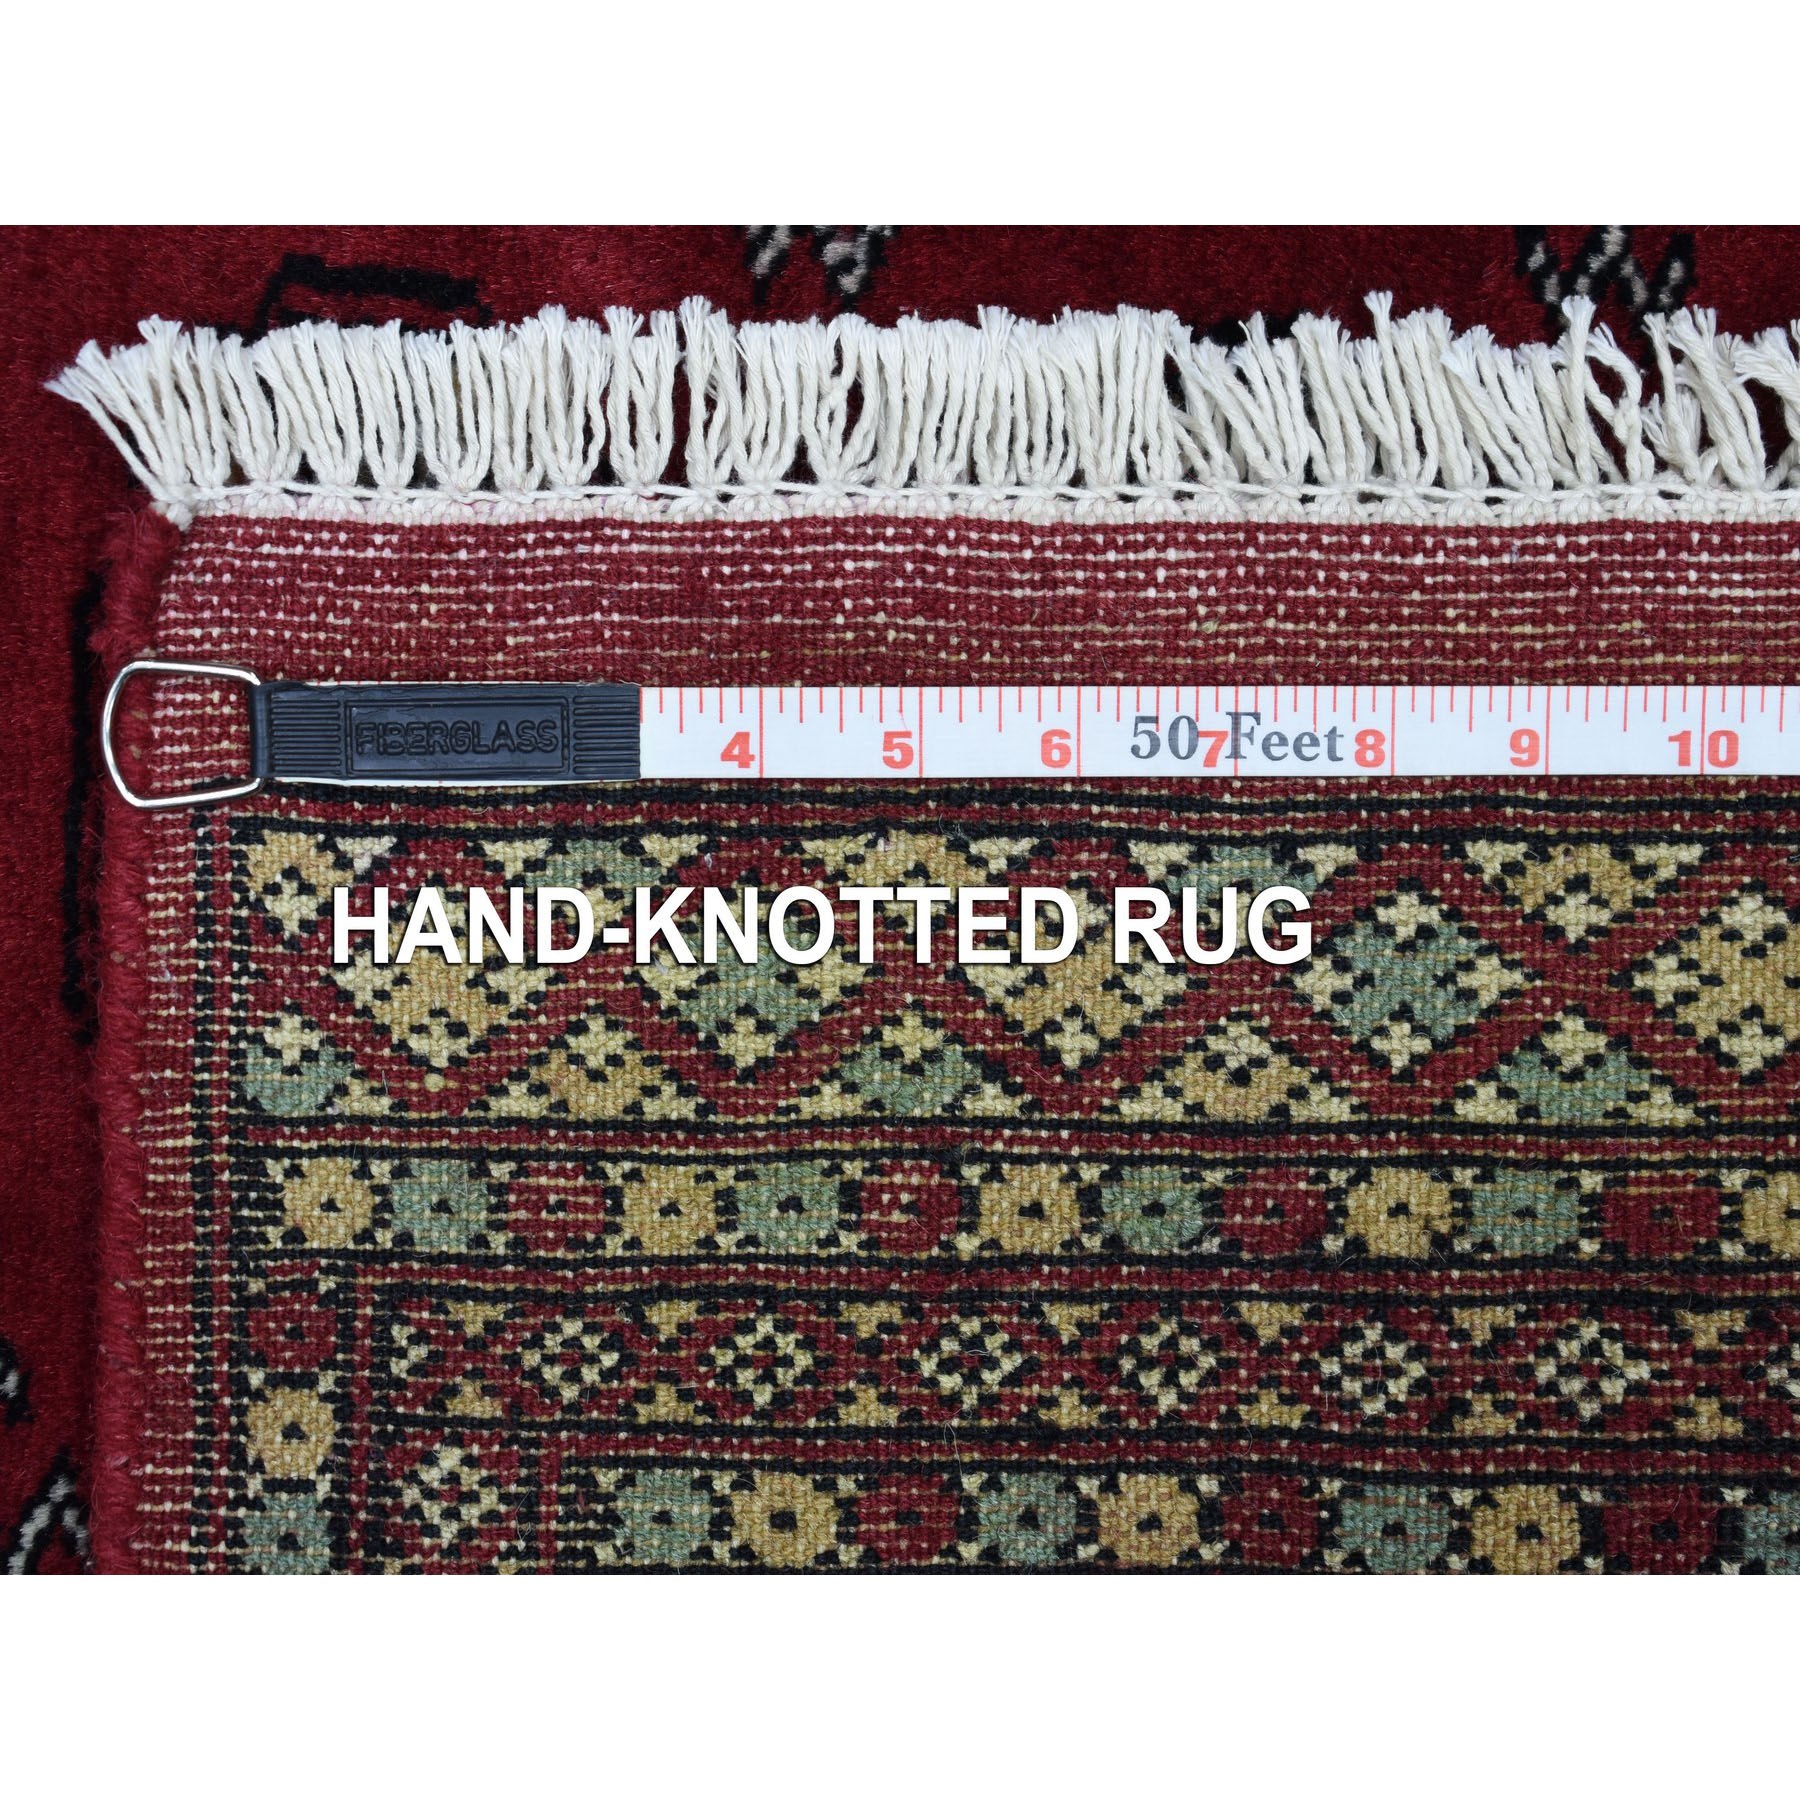 2'6"x3'9" Rich Red Denser Weave 250 KPSI Hand Woven Pure Afghan Wool Hand Woven Oriental Rug 